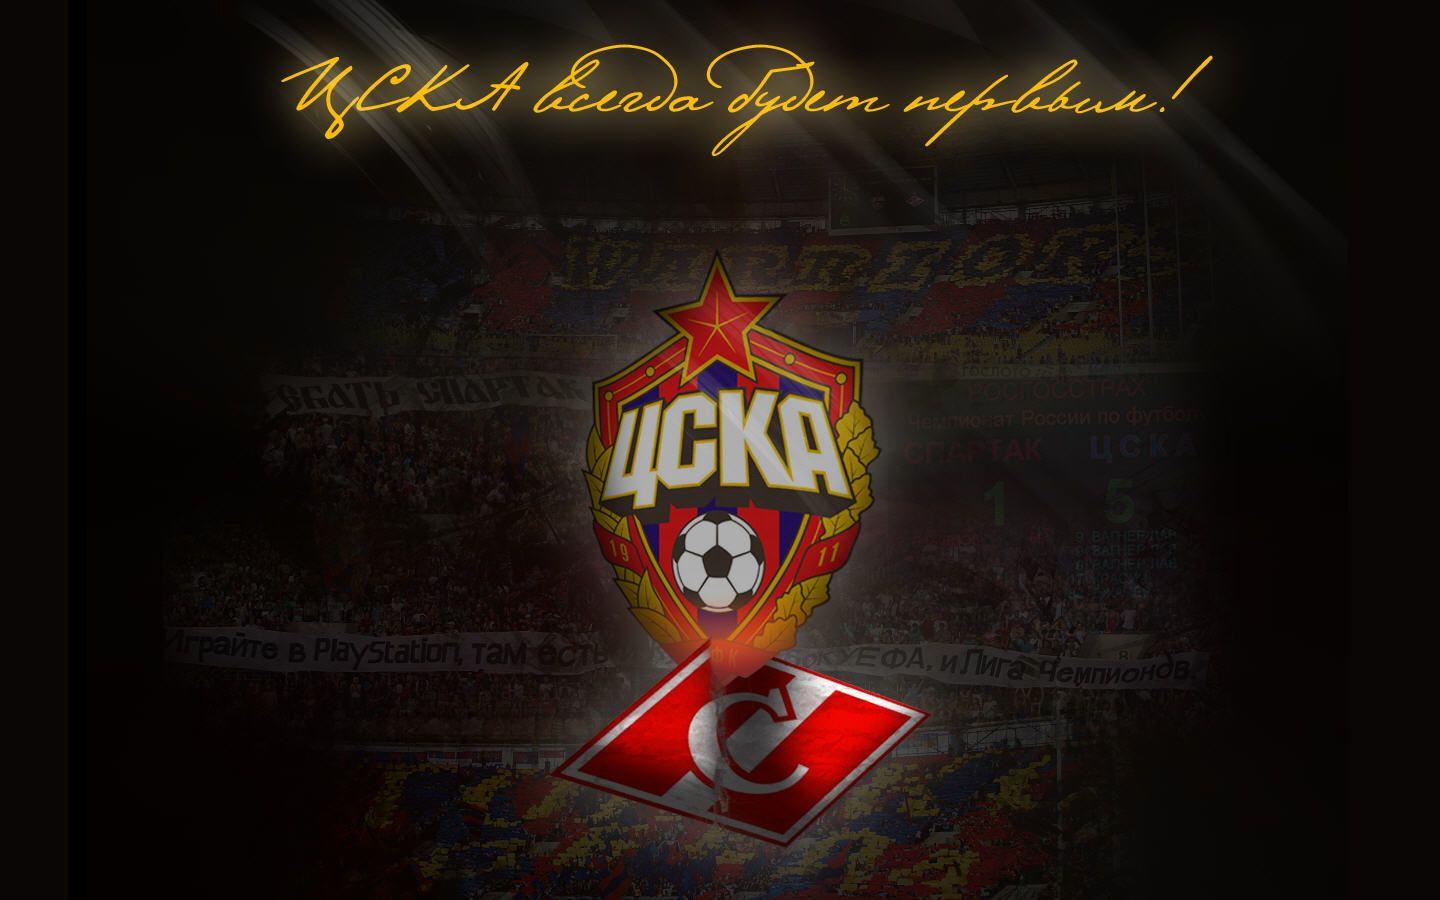 Cska Moscow wallpaper wallpaper, Football Picture and Photo